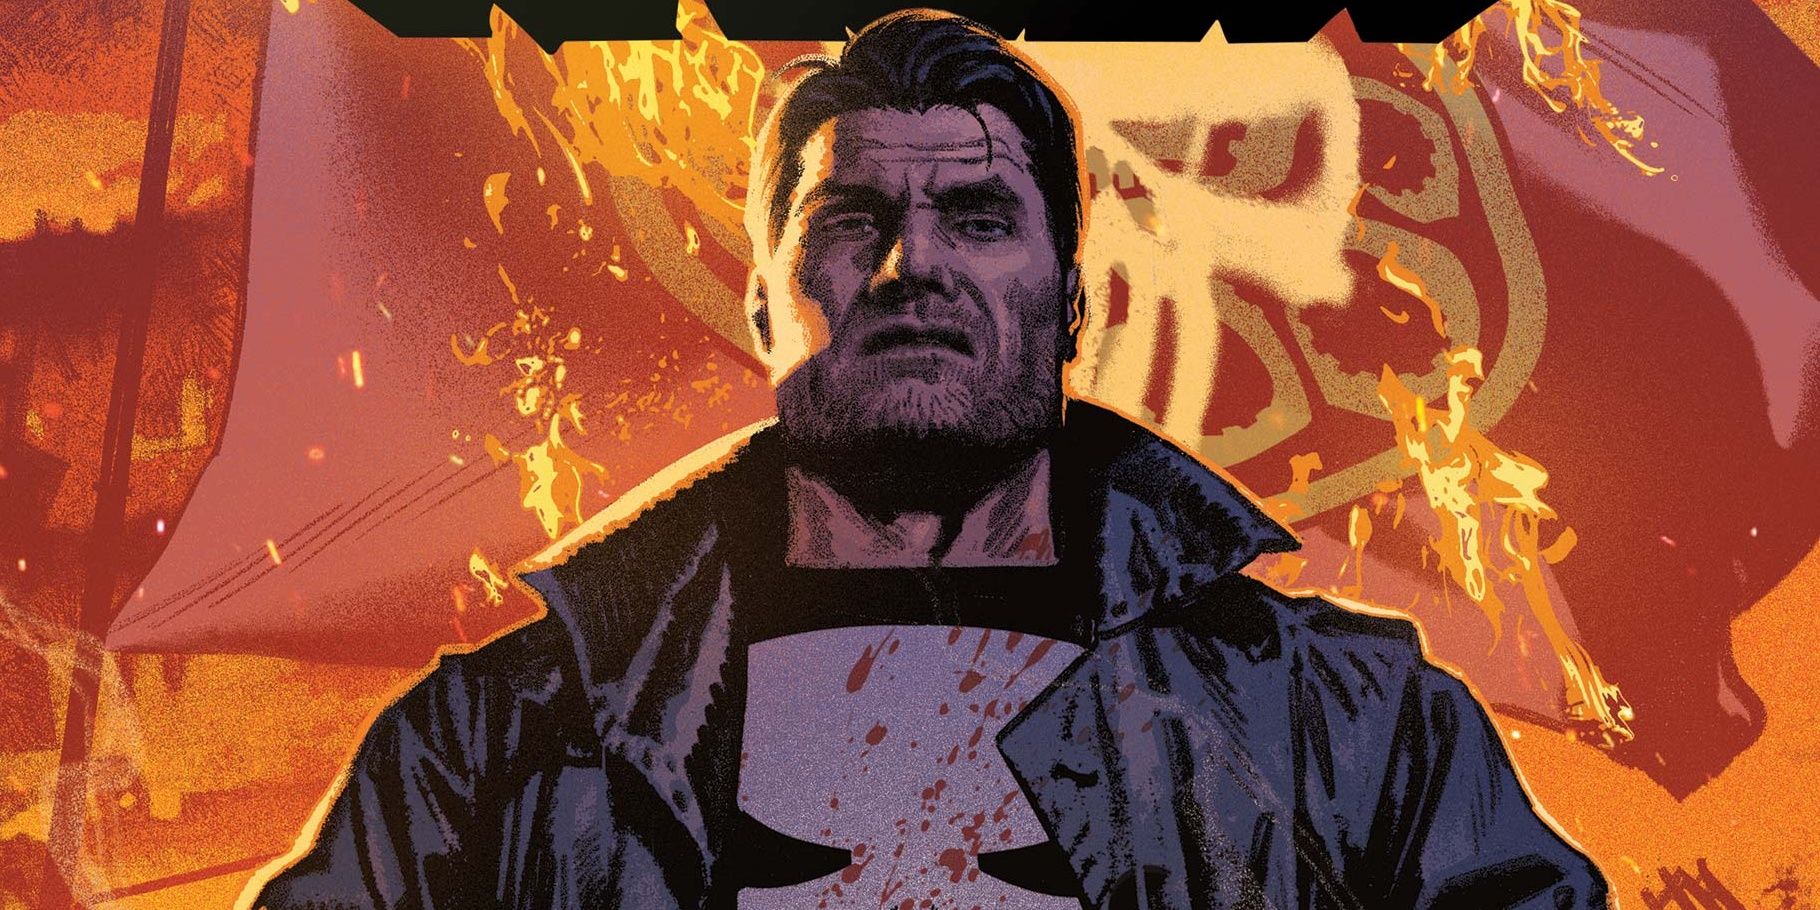 Punisher in front of a burning flag